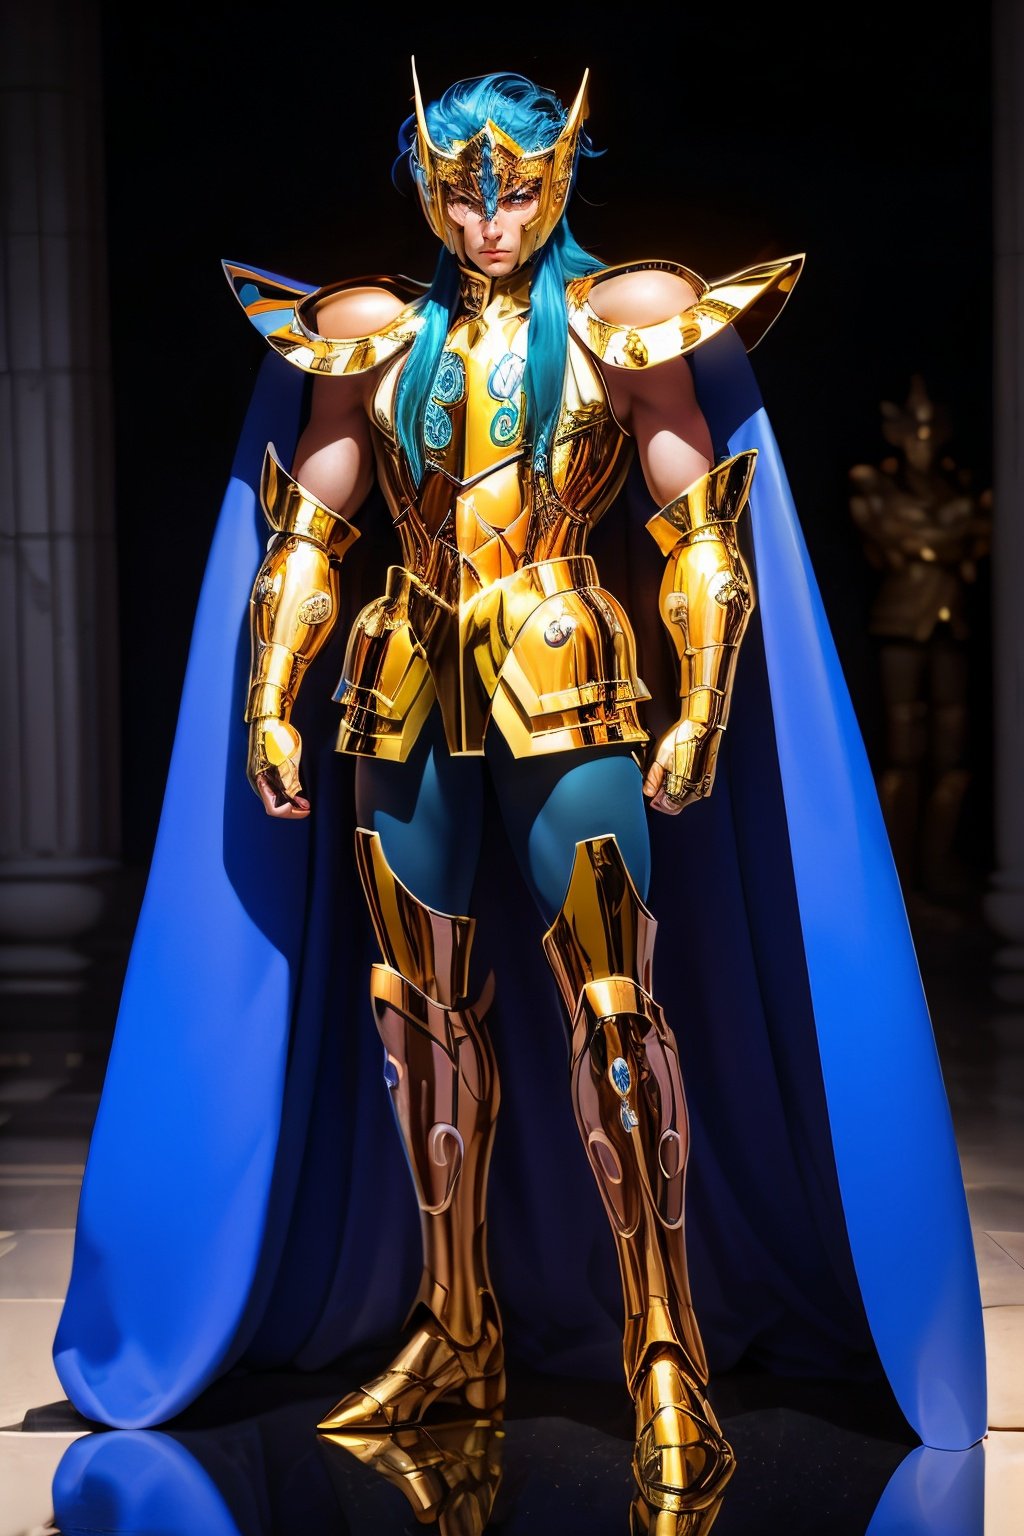 A man, male details, Kamus Aquarius from Saint Seiya, standing in front of a giant ice cube, masterpiece, best quality, highly detailed RAW color photo, sharp focus, 8k high definition, long hair, turtle neck, male wearing gold armor, (klein blue hair:1.2), blue eyes, helmet, leg armor, shoulder armor, yellow armor, reflection on armor, headset, yellow headband, sparking armor, blue skin-tight vinyl, at night, dark temple with Greek pillars, Aquarius Armor, standing straight, sacredness, landscape, bright, facial freckles (0.1), to8contrast style, posing in a dark temple with Greek pillars, rim lighting (1.4), two-tone lighting with icy blue highlights, octane, unreal, dimly lit, low key (1.3), moonlight reflection, aura of coldness, frosty atmosphere.